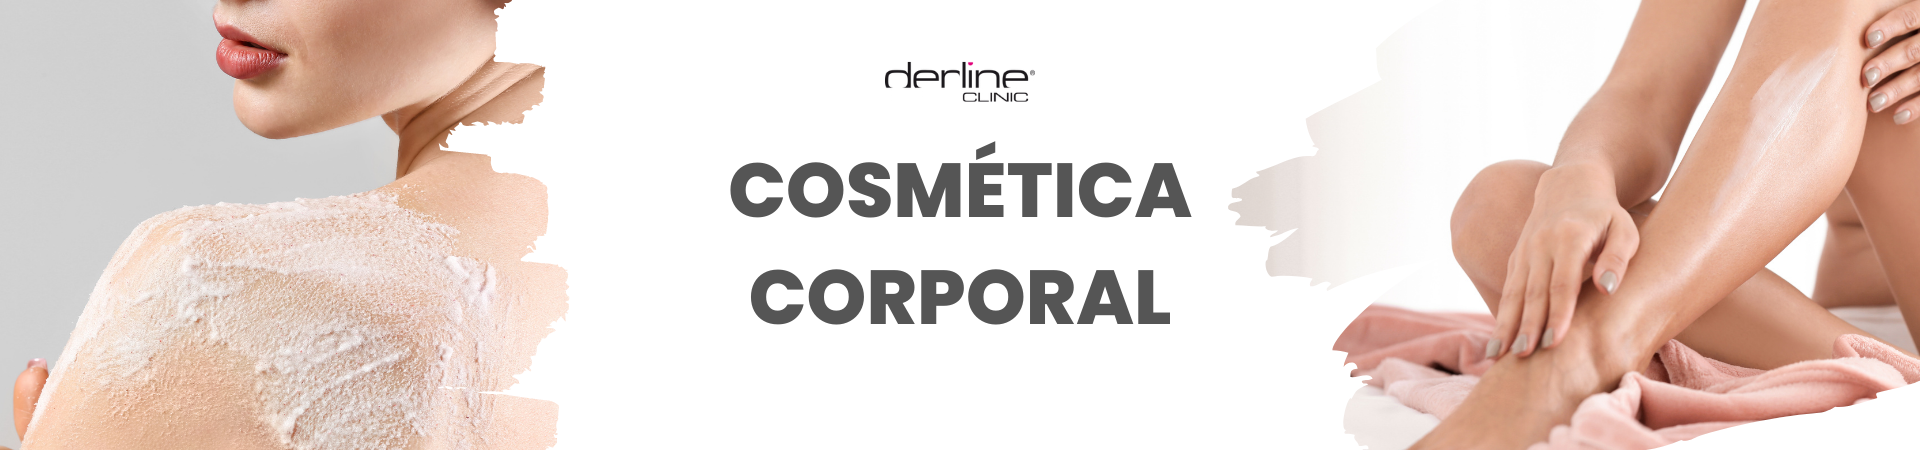 banner_cosmetica_corporal.png